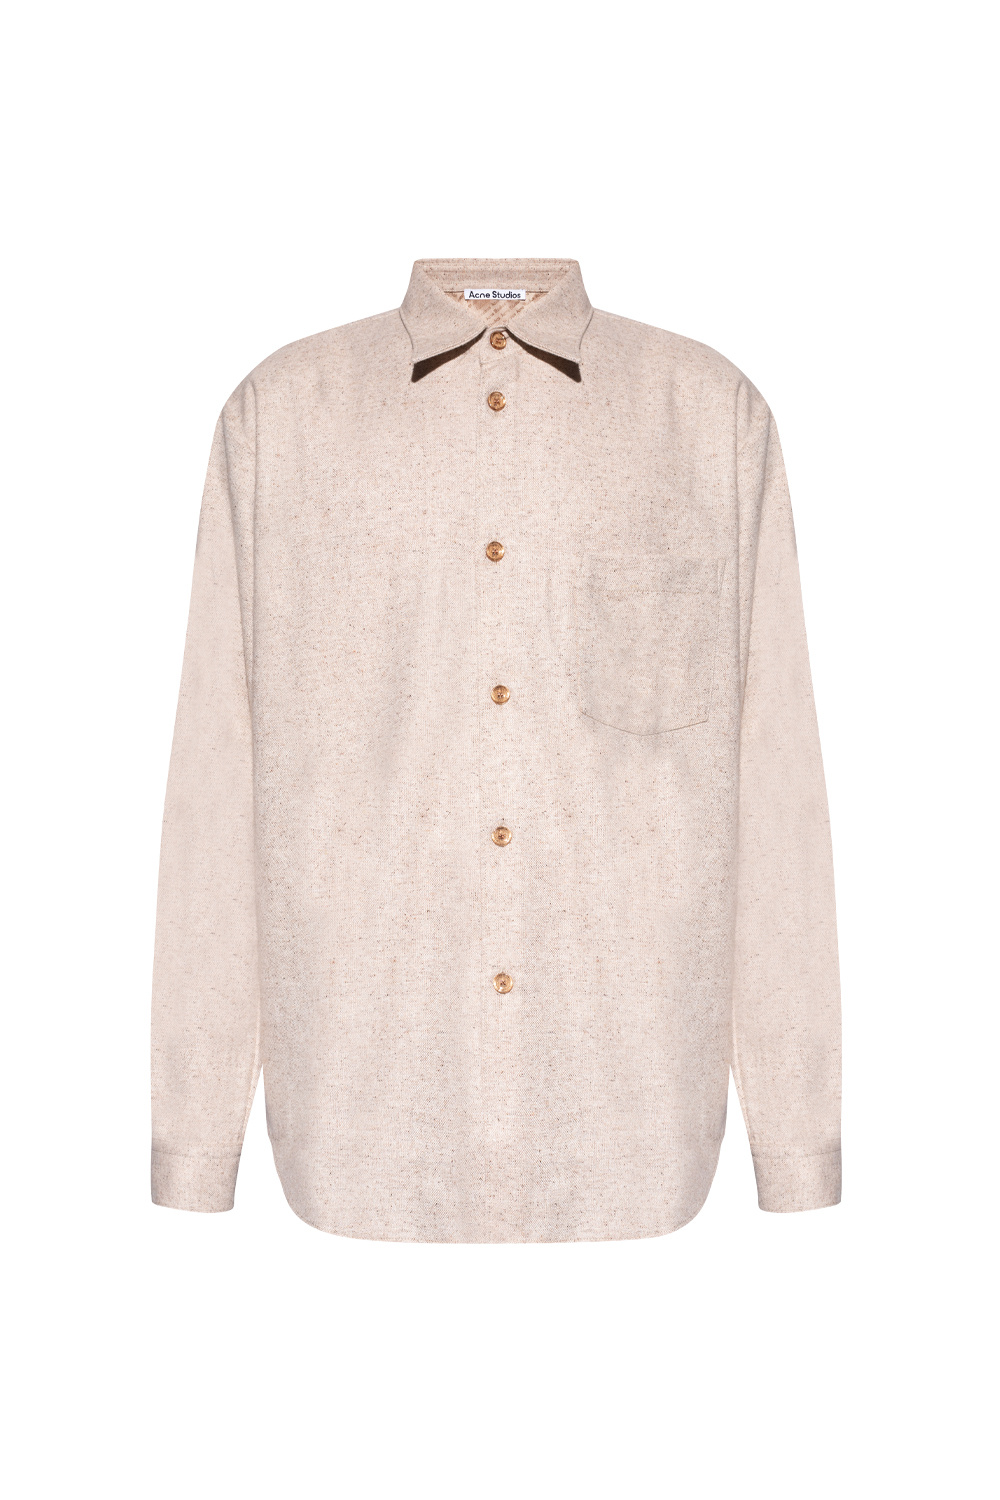 Superdry Sweater Roll Neck Lambswool - Shirt with pocket Acne